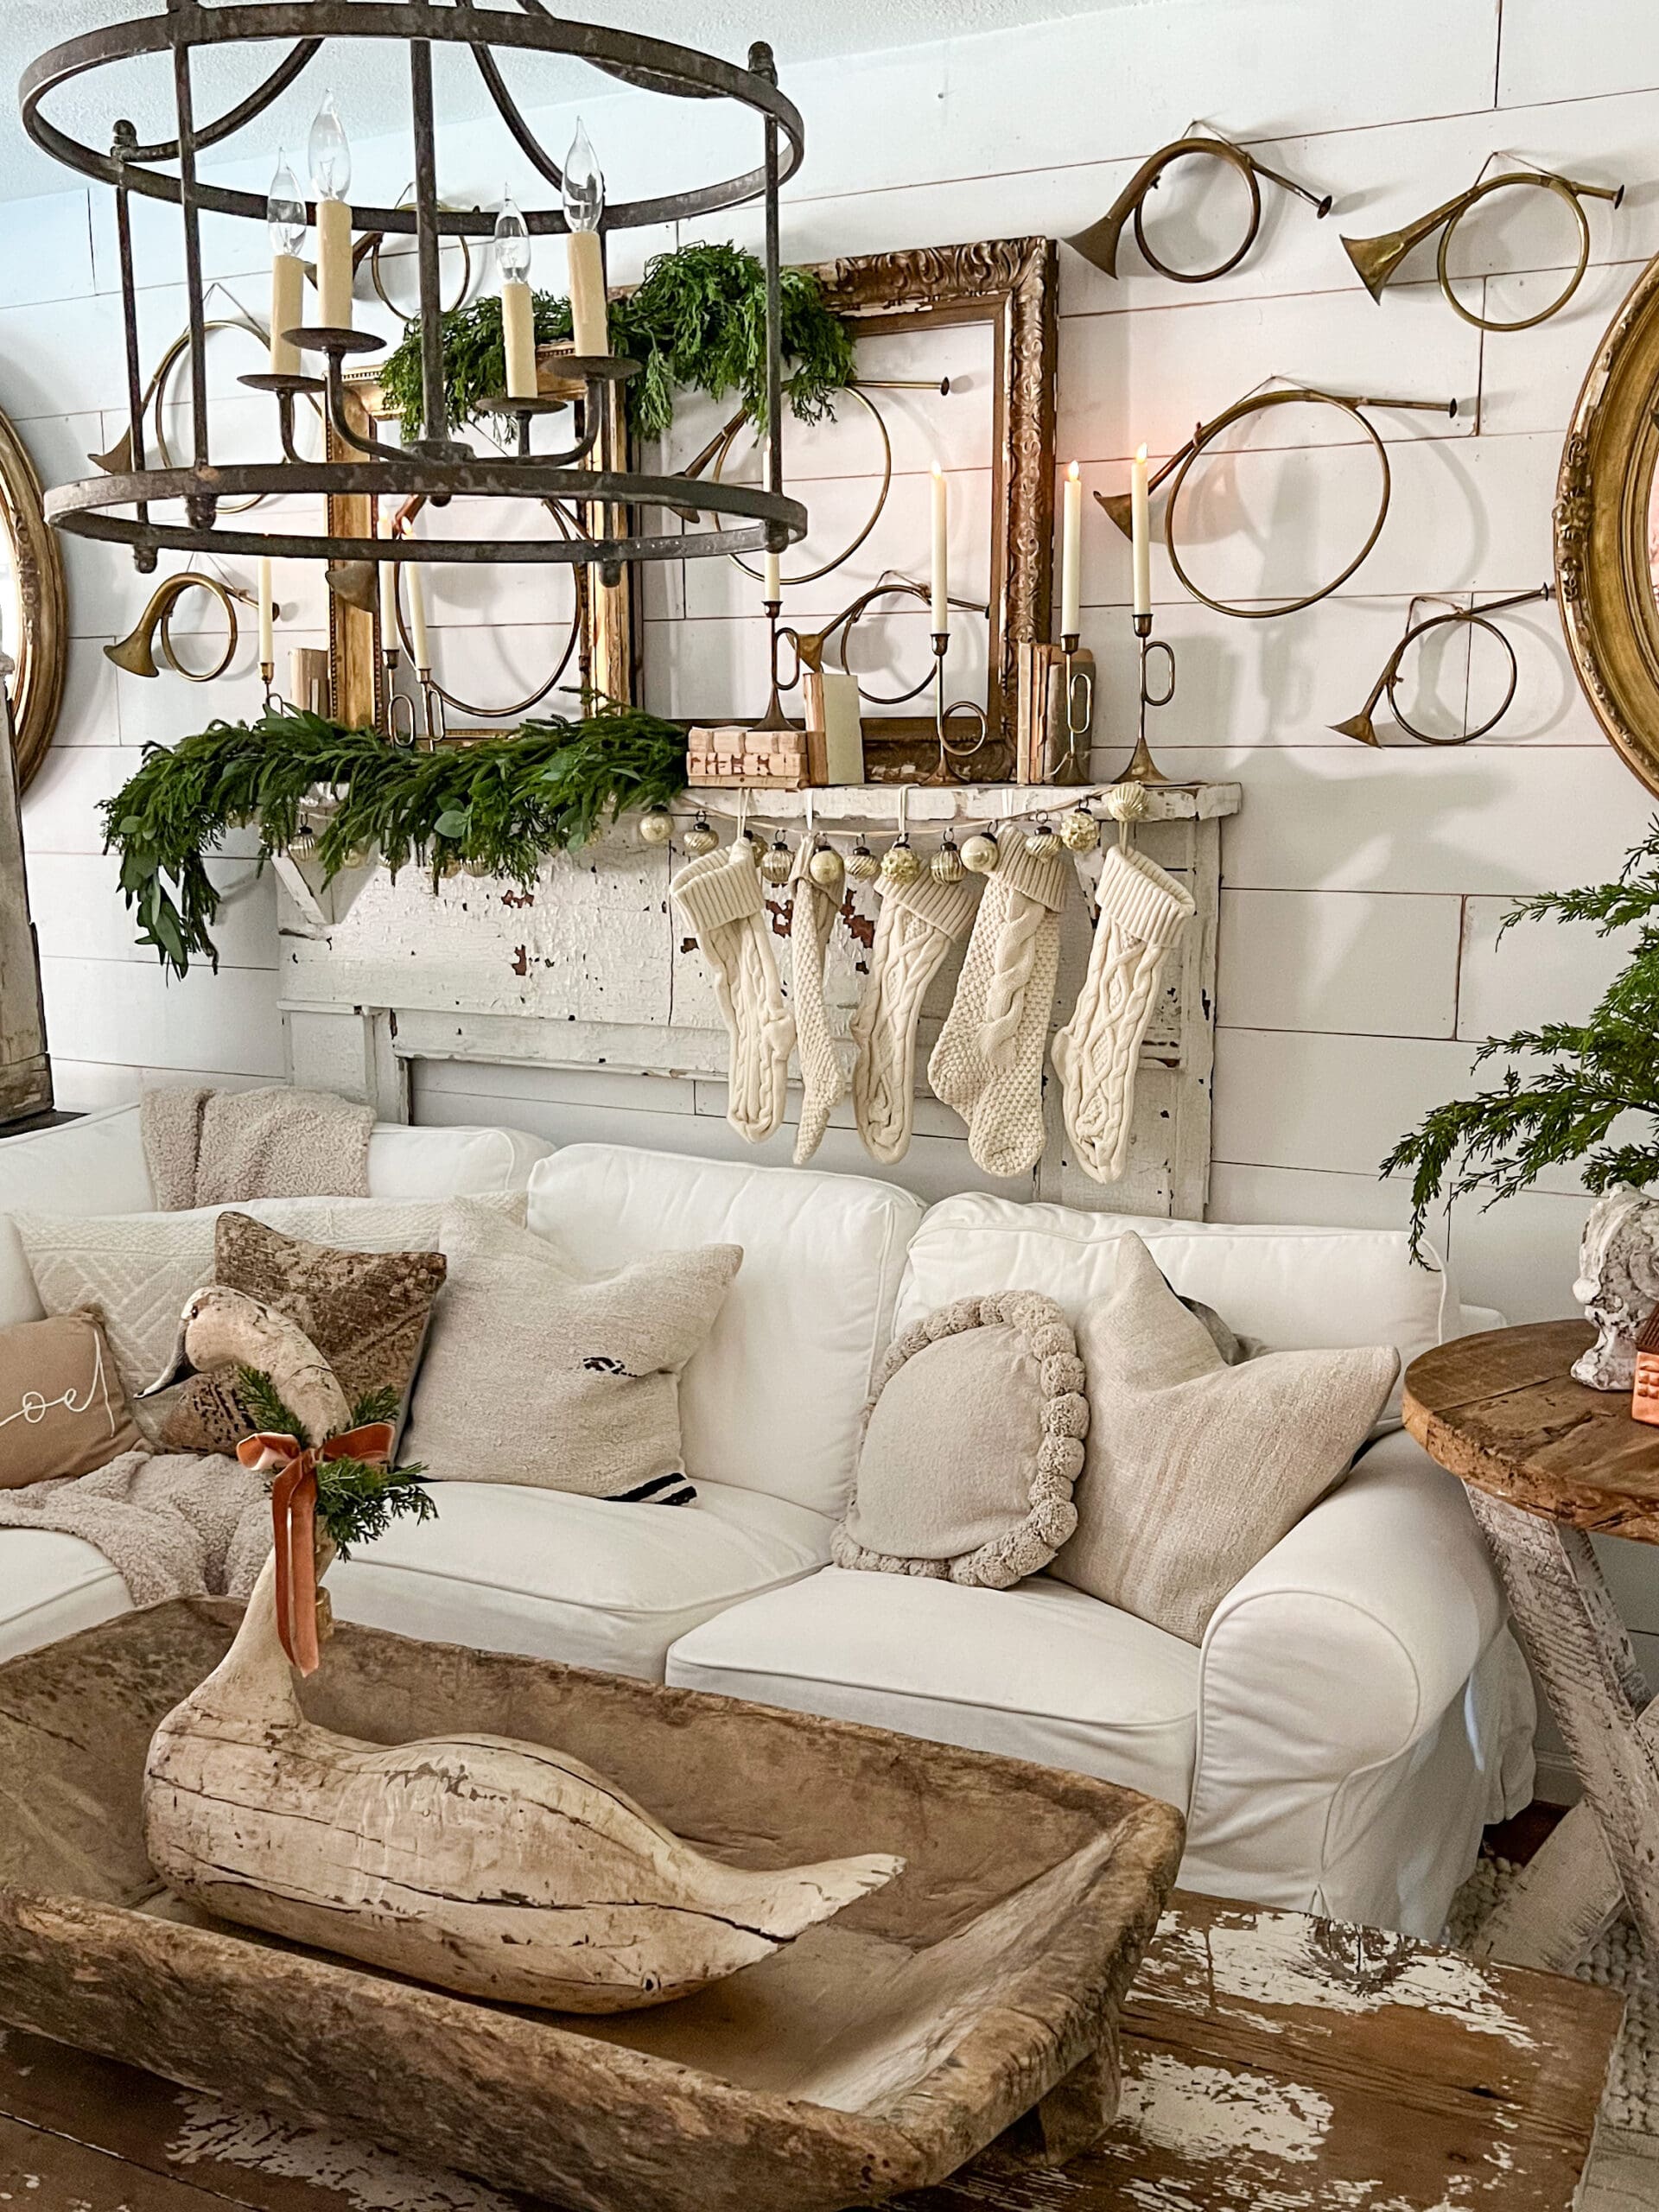 Winter Decor and Lighting Ideas: Turn Your Home into a Cozy Wonderland